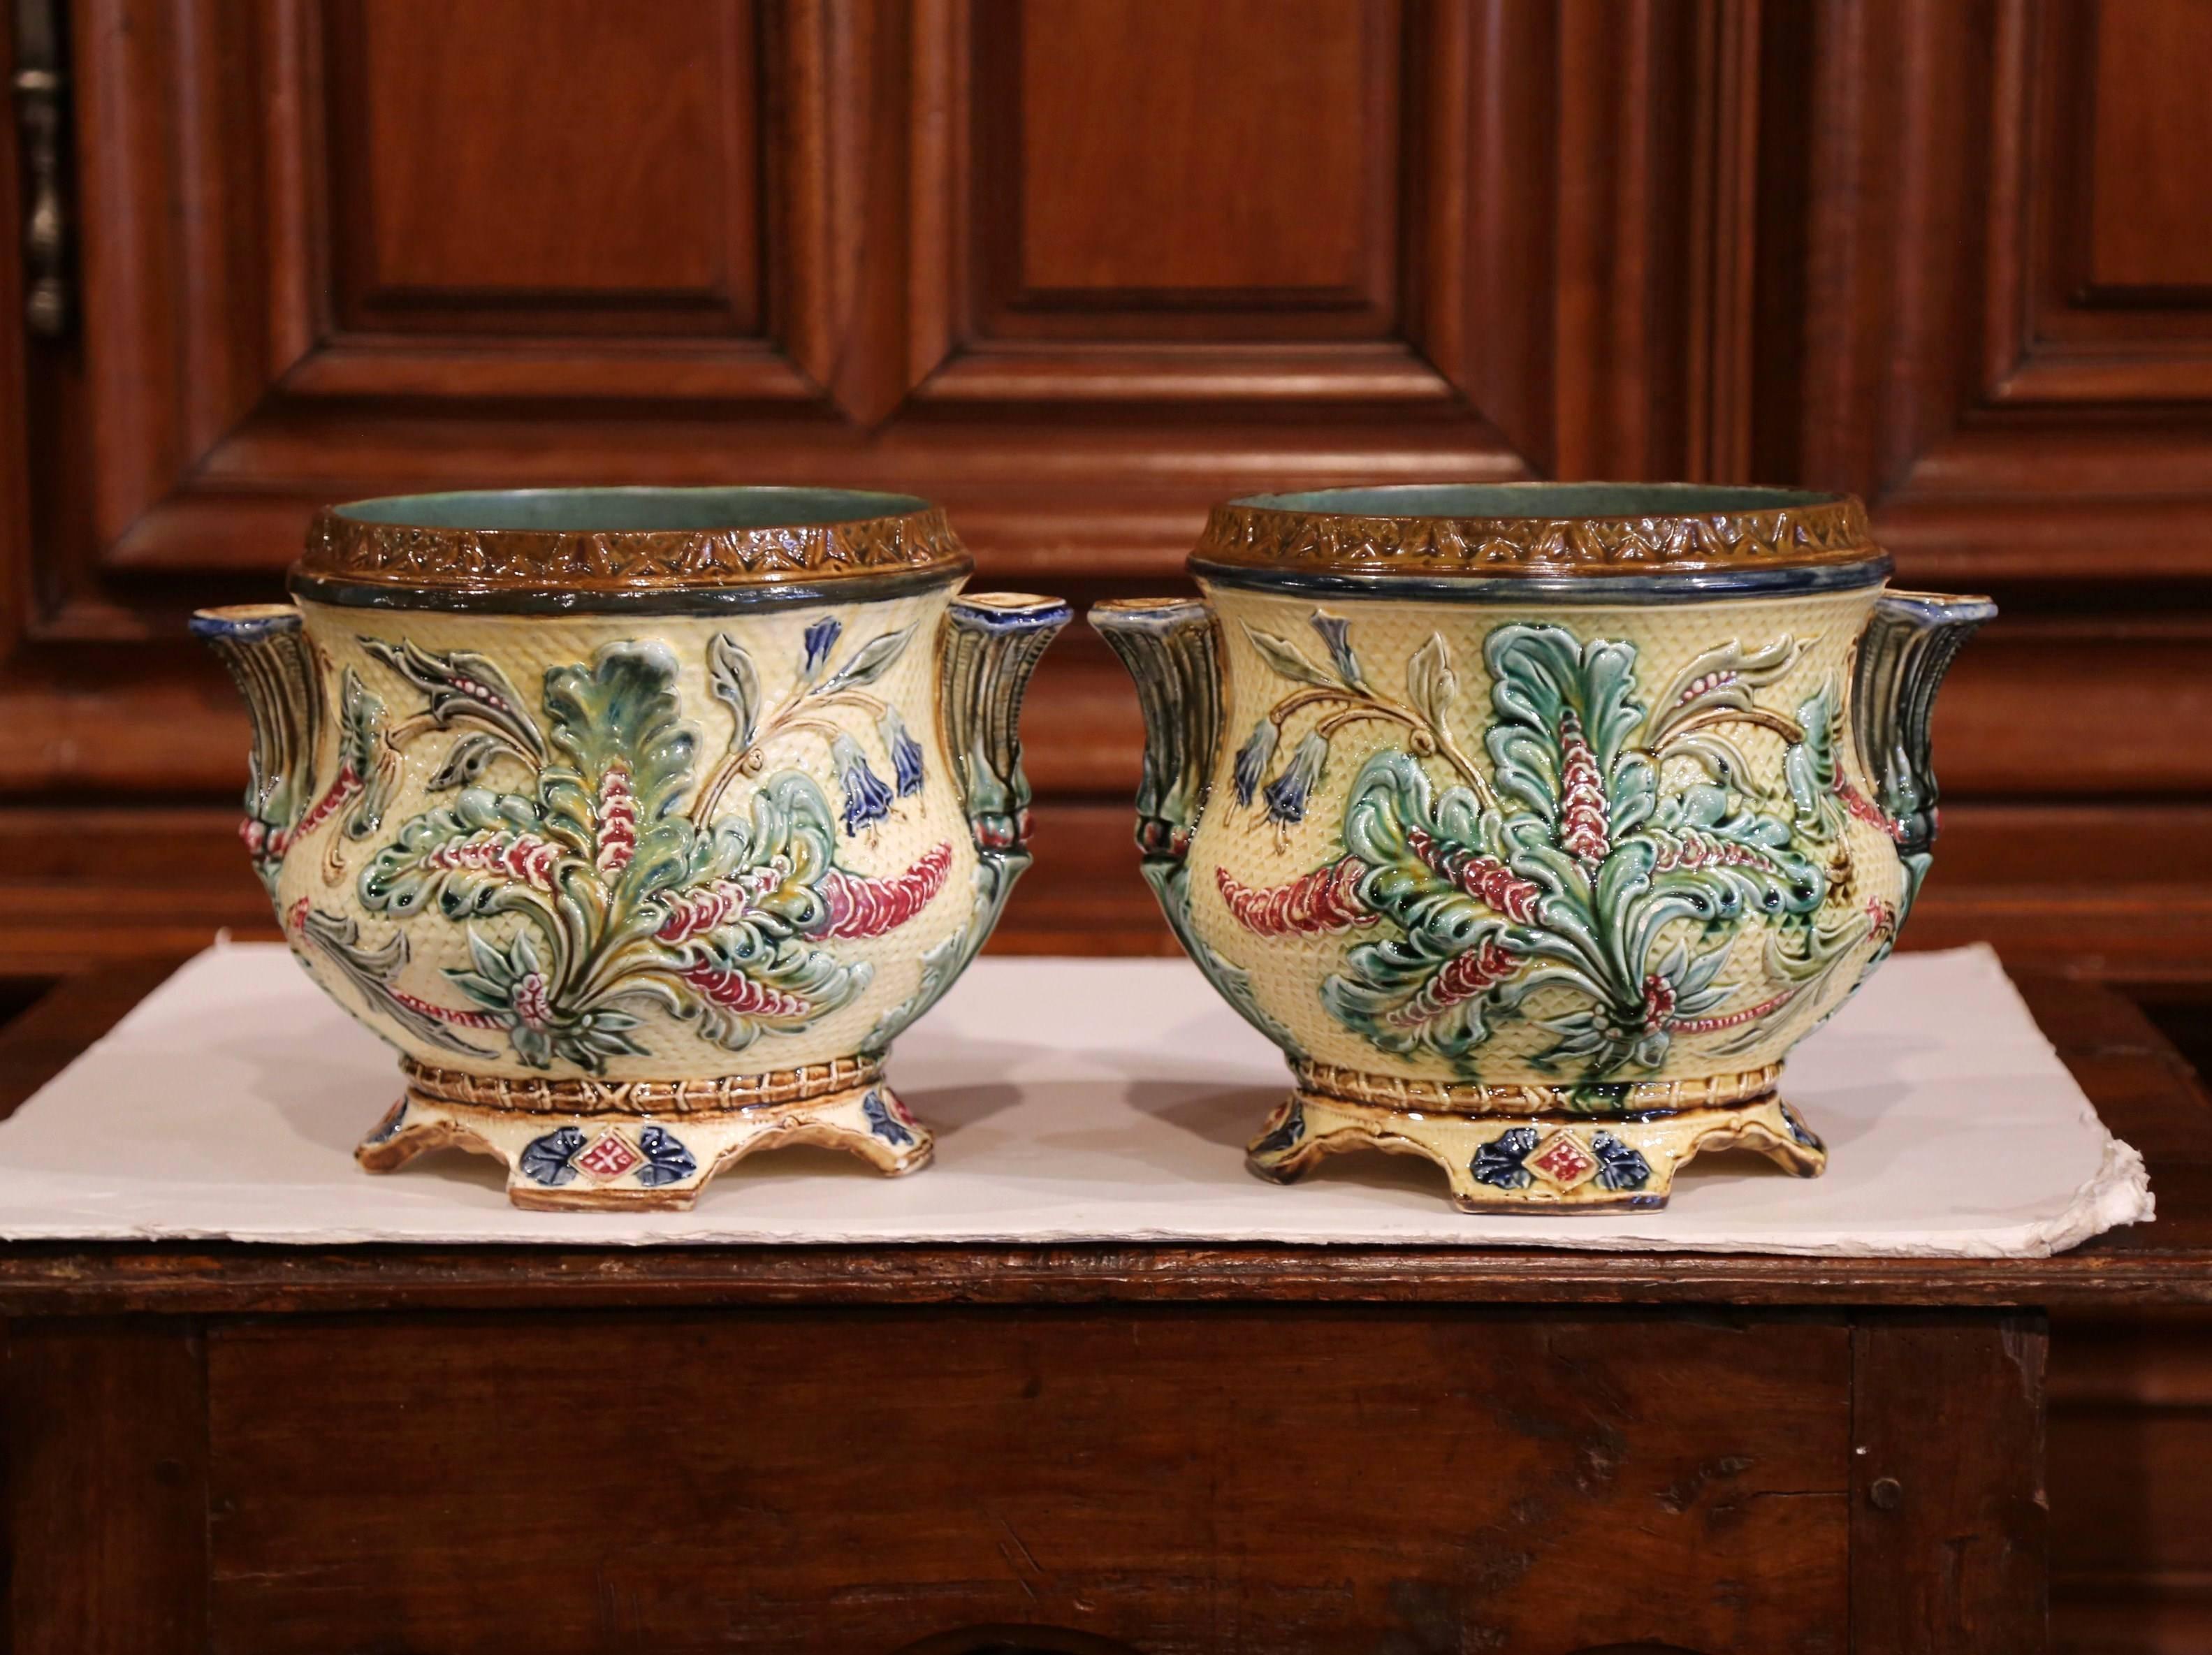 Ceramic Pair of 19th Century French Hand-Painted Barbotine Cachepots with Foliage Motifs